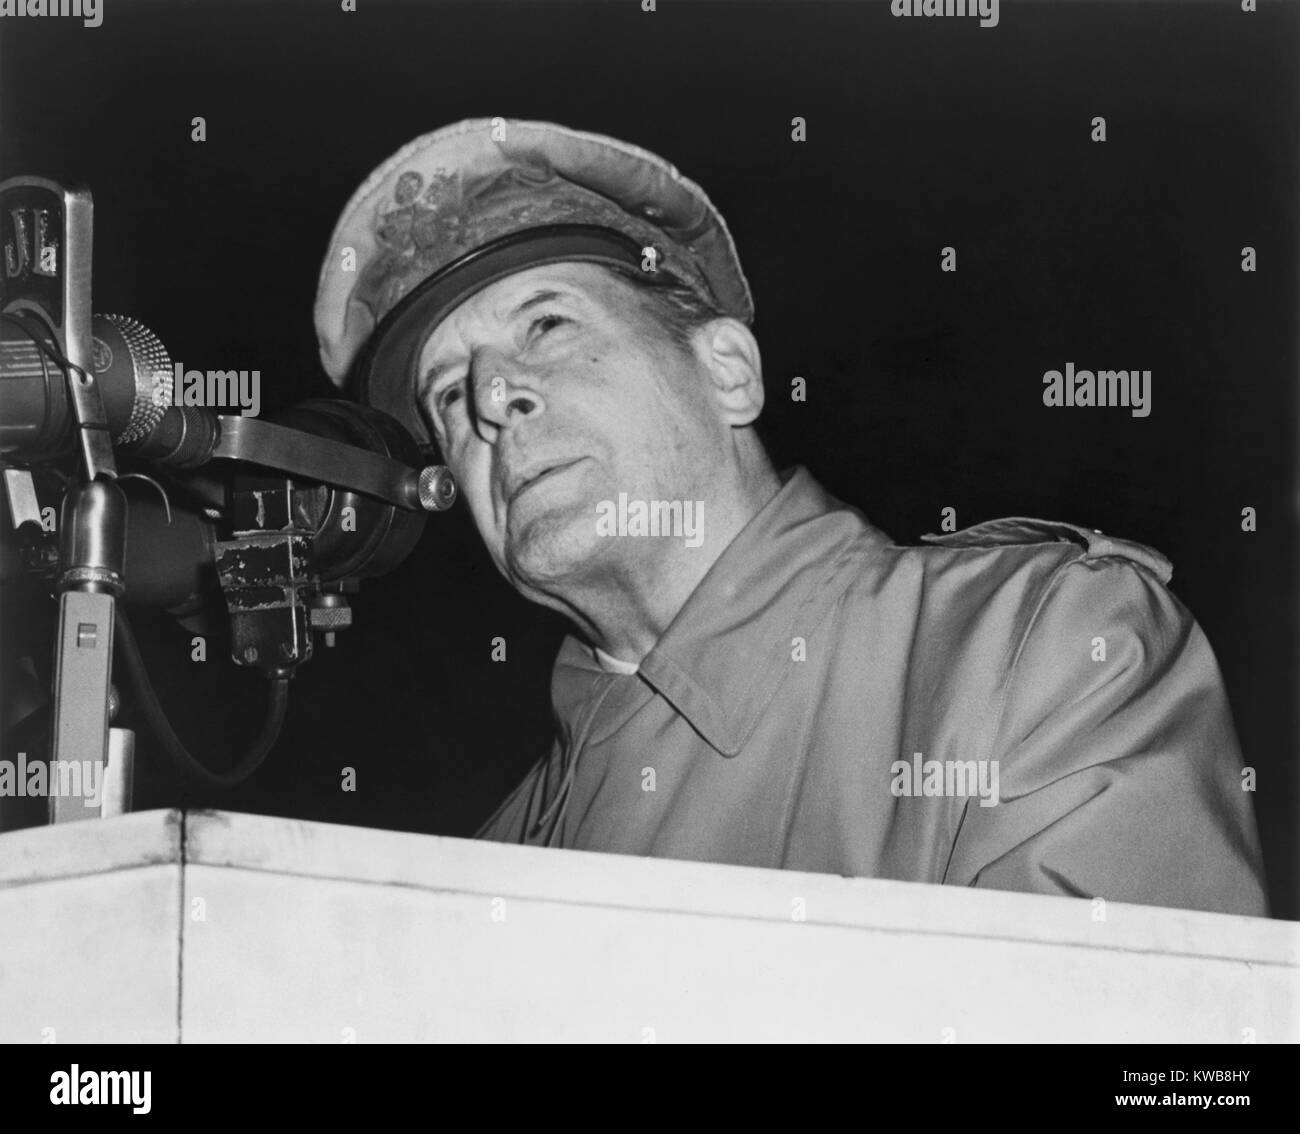 General Douglas MacArthur addressing an audience of 50,000 at Soldier's Field, Chicago on April 26, 1951. He simplified the complexities of the Korean War, advocating 'victory over the nation and men who, without provocation, have attacked us.' (BSLOC 2014 11 142) Stock Photo